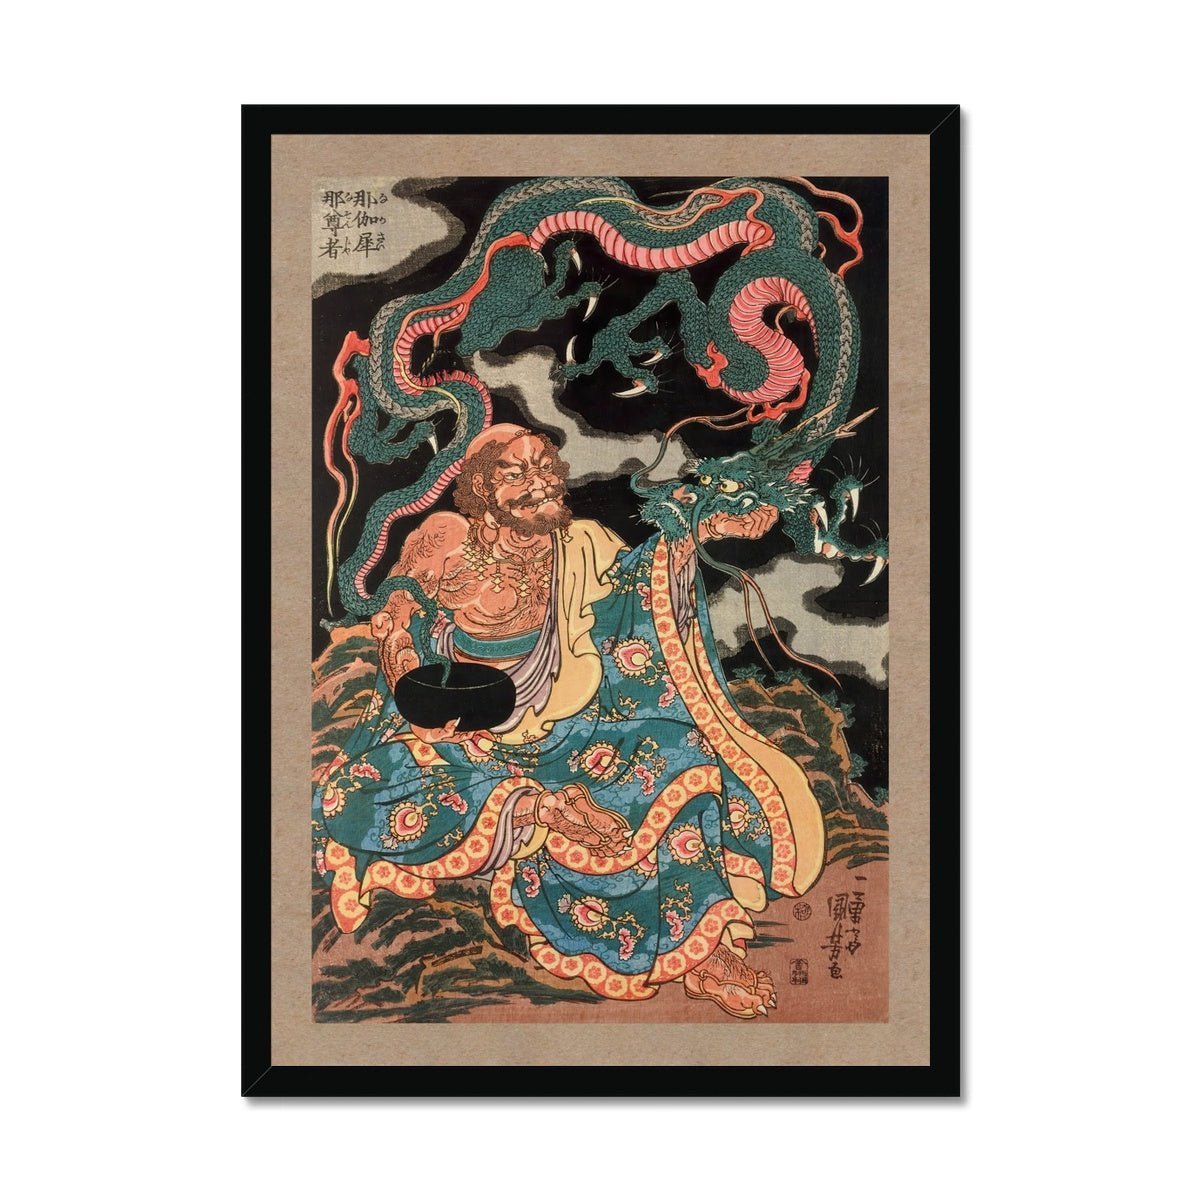 Framed Print 6"x8" / Black Frame The Arhat Nakasaina Sonja Seated On a Rock, with a Dragon Emerging From His Bowl, Vintage Buddhist Japanese Framed Art Print